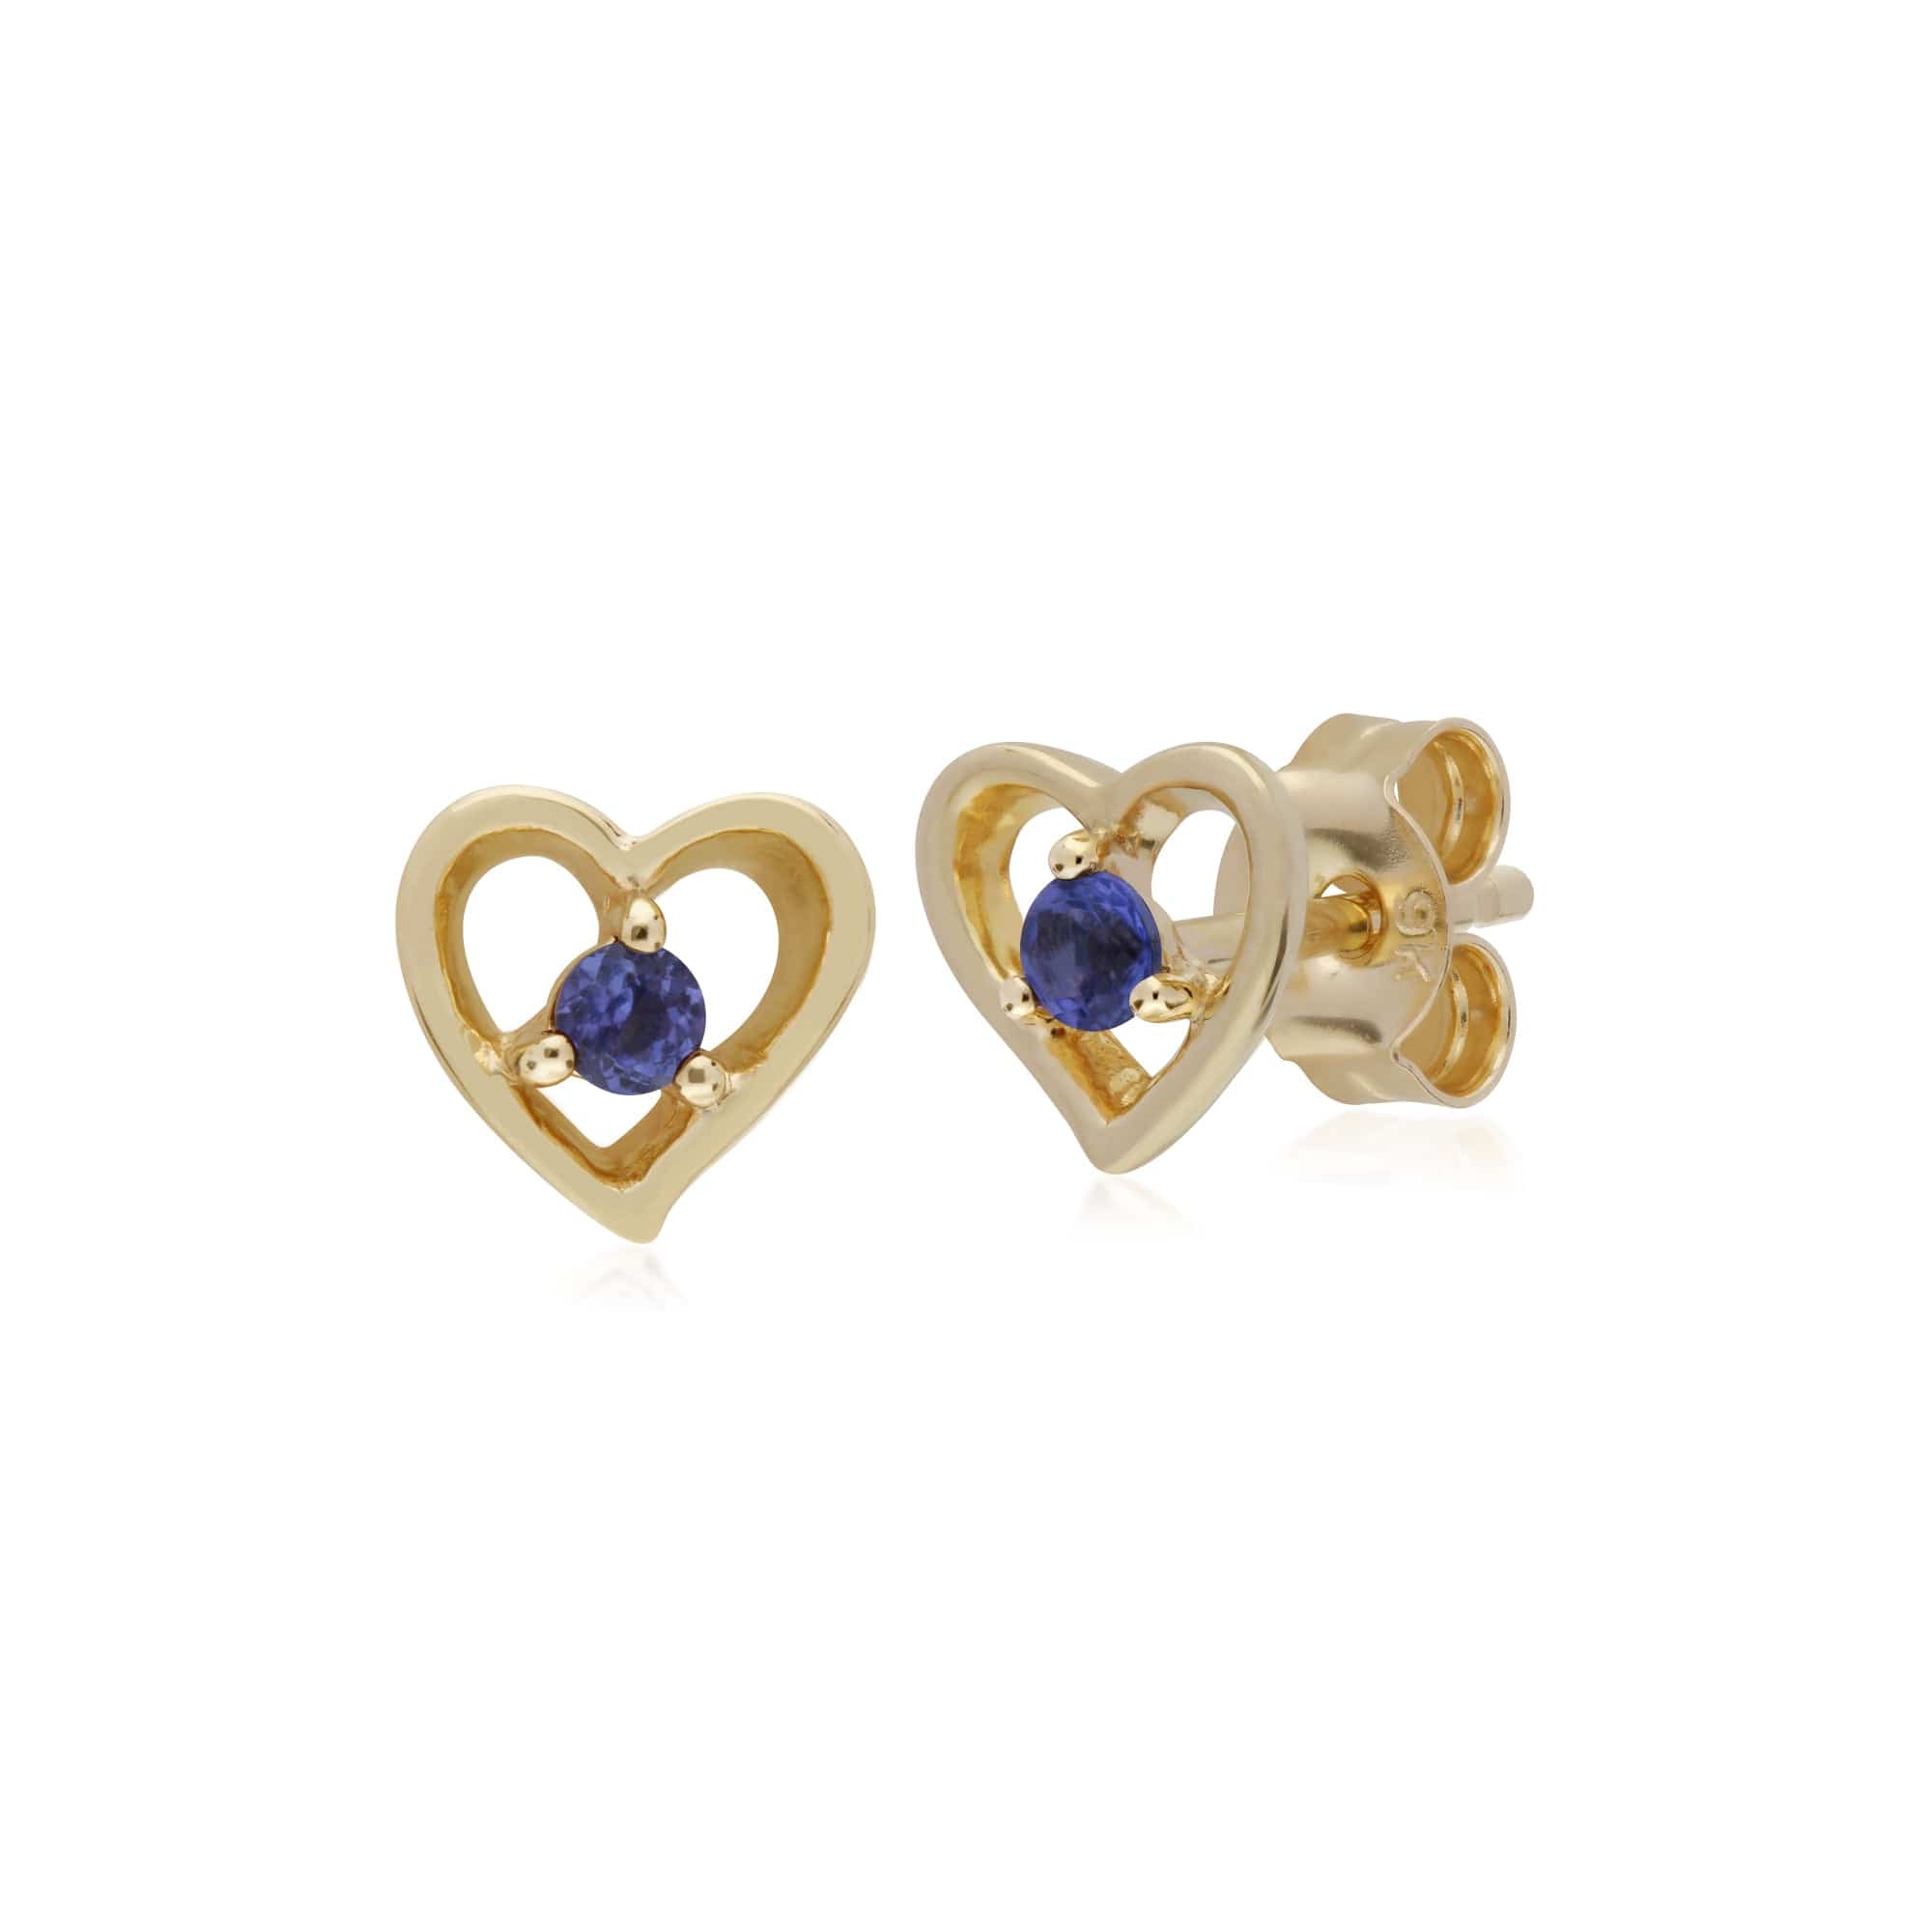 135E1521089-135P1875079 Classic Round Tanzanite Single Stone Heart Stud Earrings & Necklace Set in 9ct Yellow Gold 2